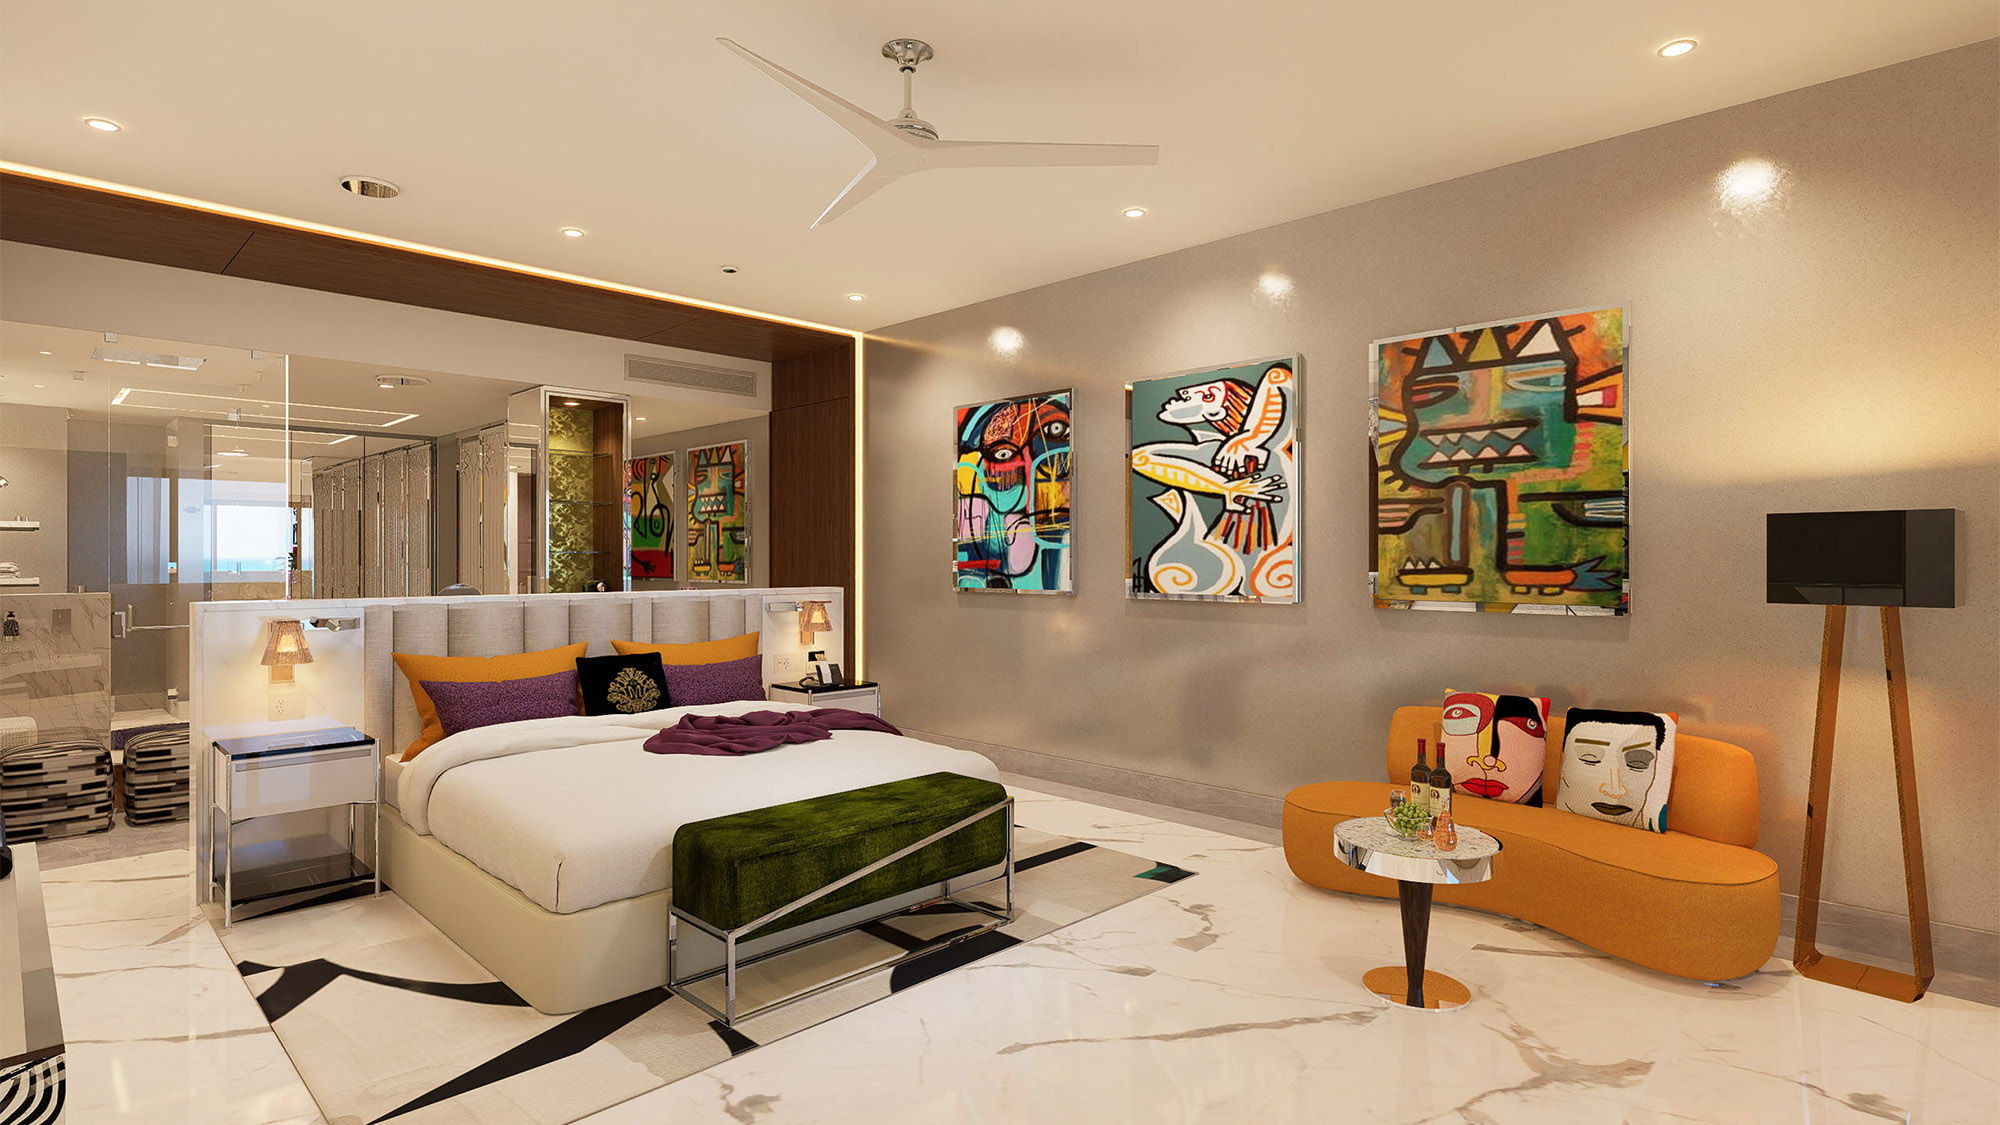 Hotel Mousai Cancun features 88 suites decked out in an eclectic and modern design.